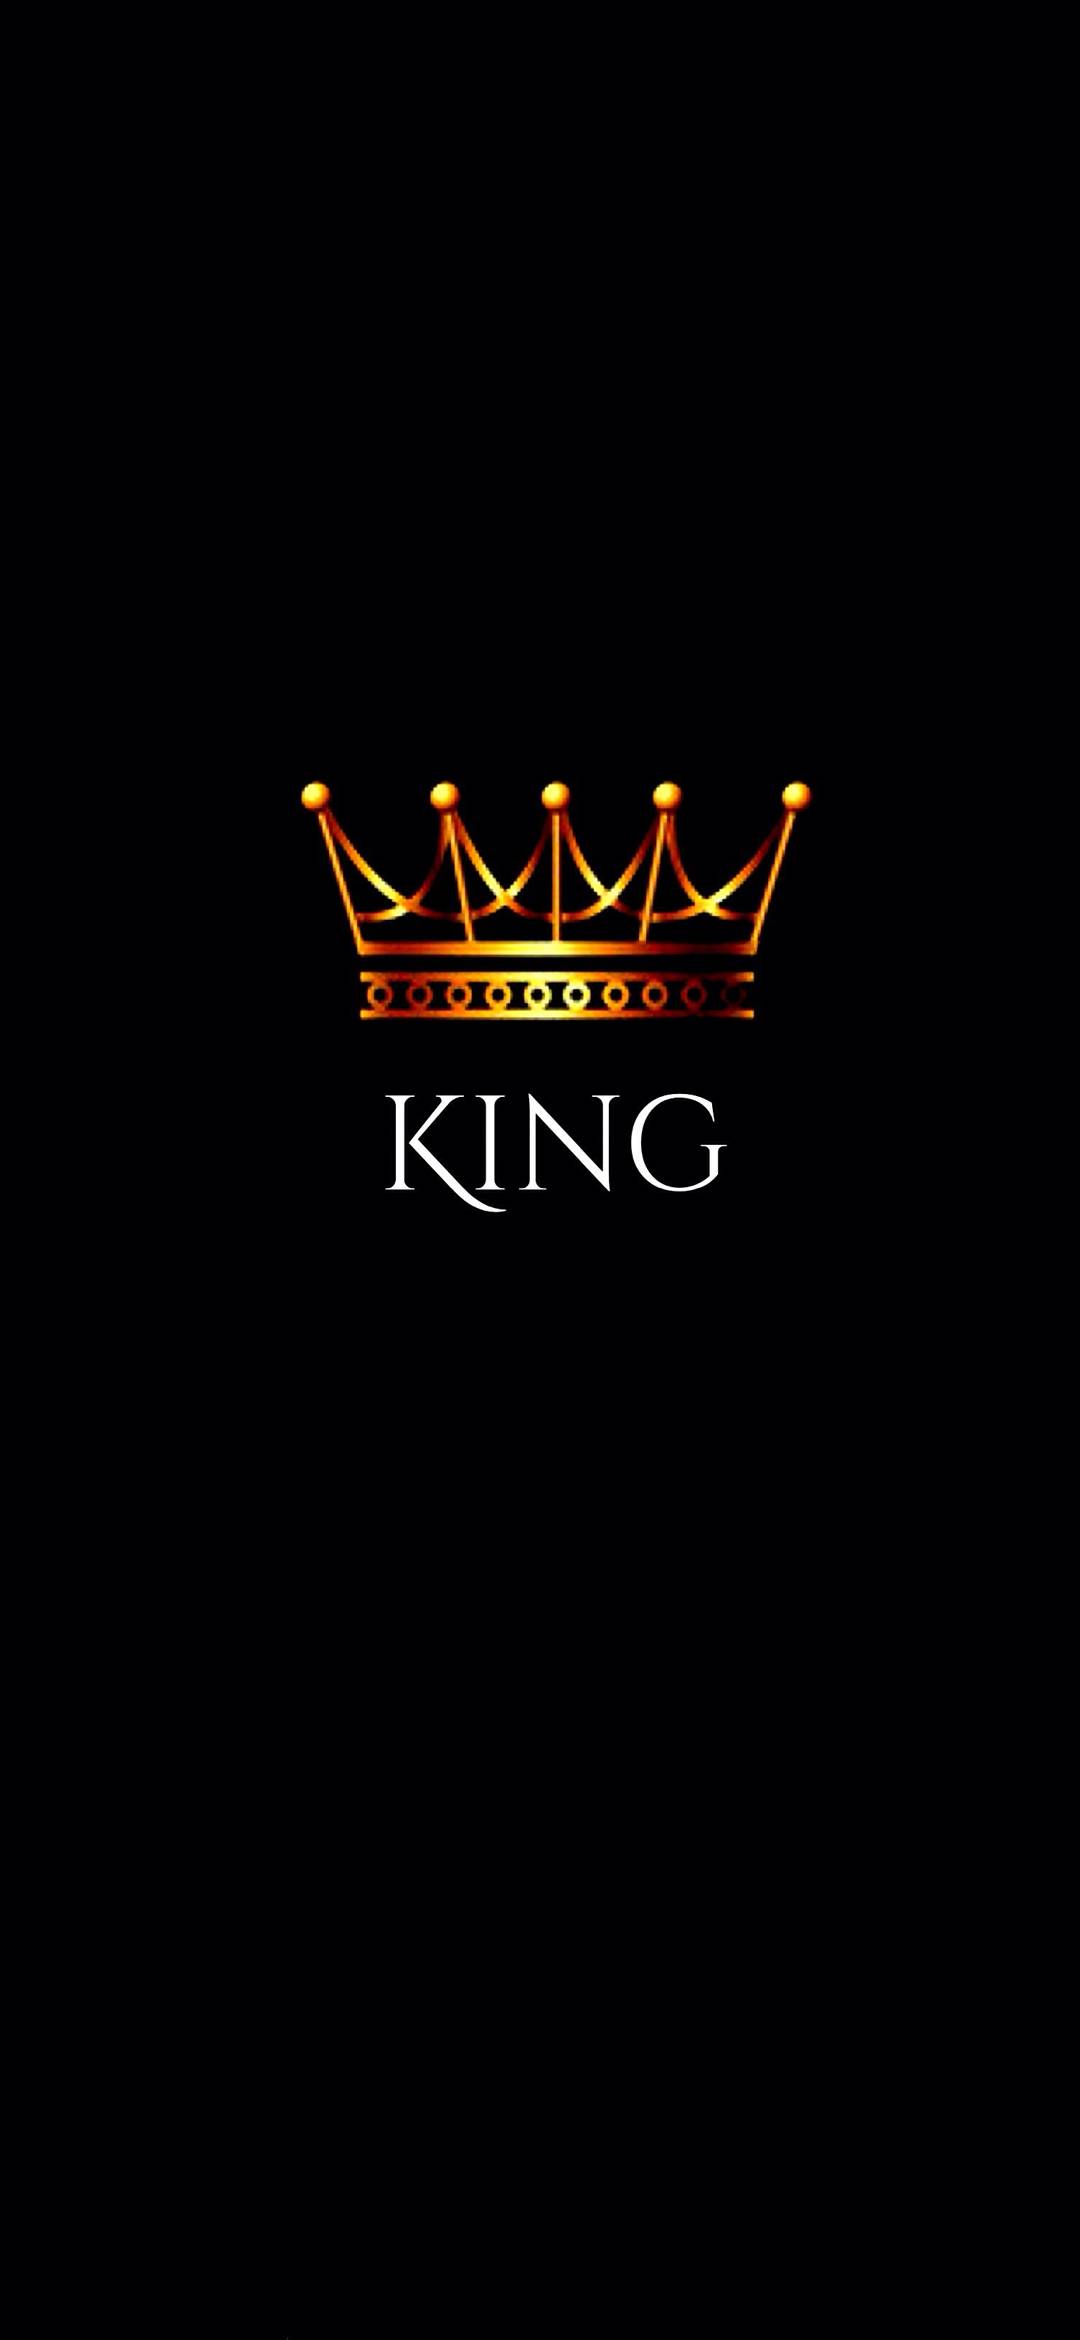 King Card IPhone Wallpaper HD  IPhone Wallpapers  iPhone Wallpapers